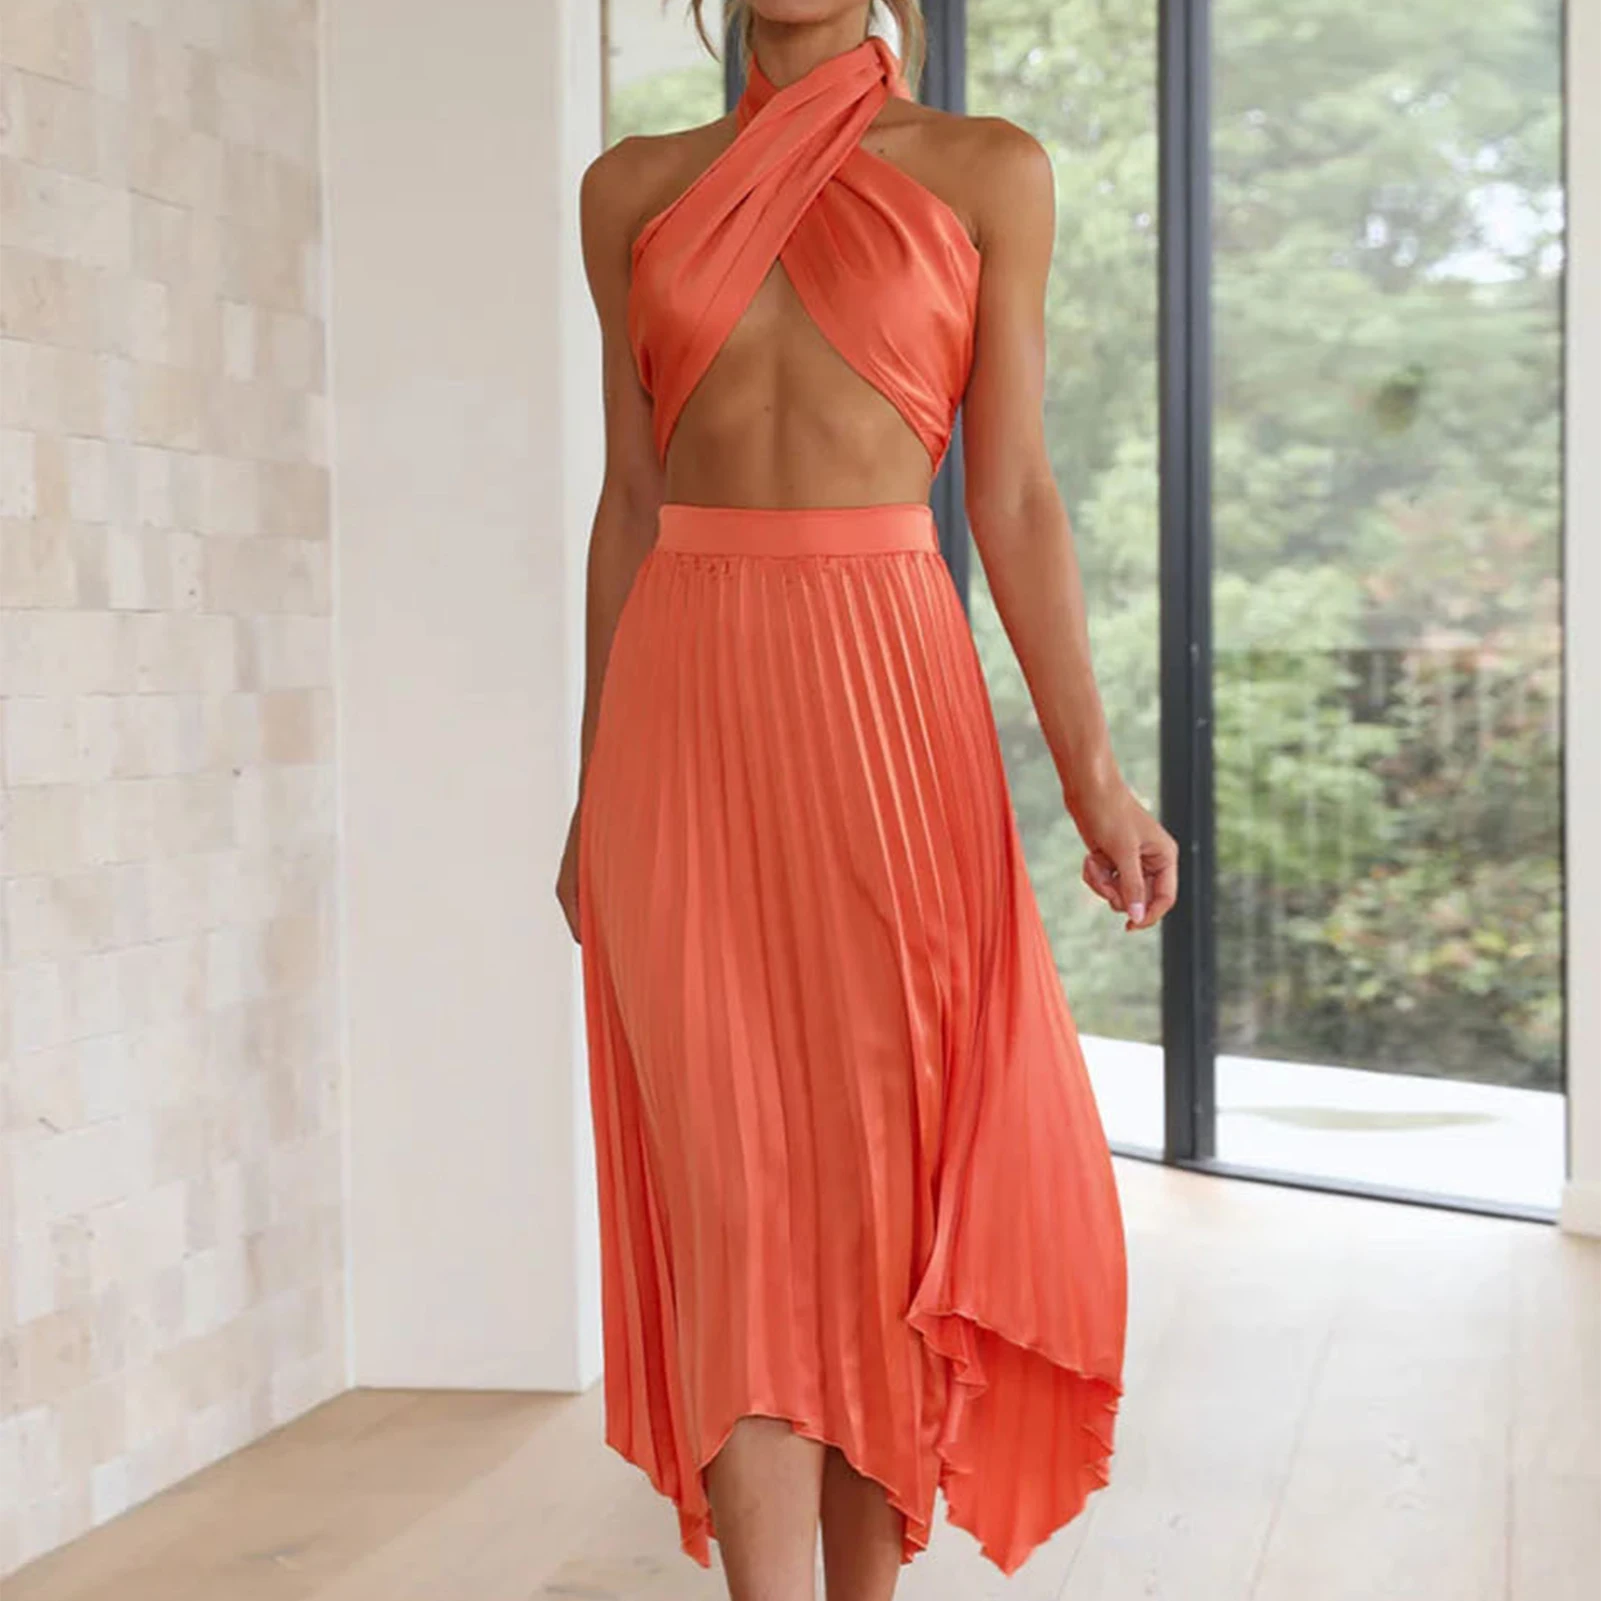 Women Sleeveless Tops+Skirts Chest Bandage Summer Sexy Skirt Set Pleated Solid Color Ruched Backless Fashion Beach Vacation 1